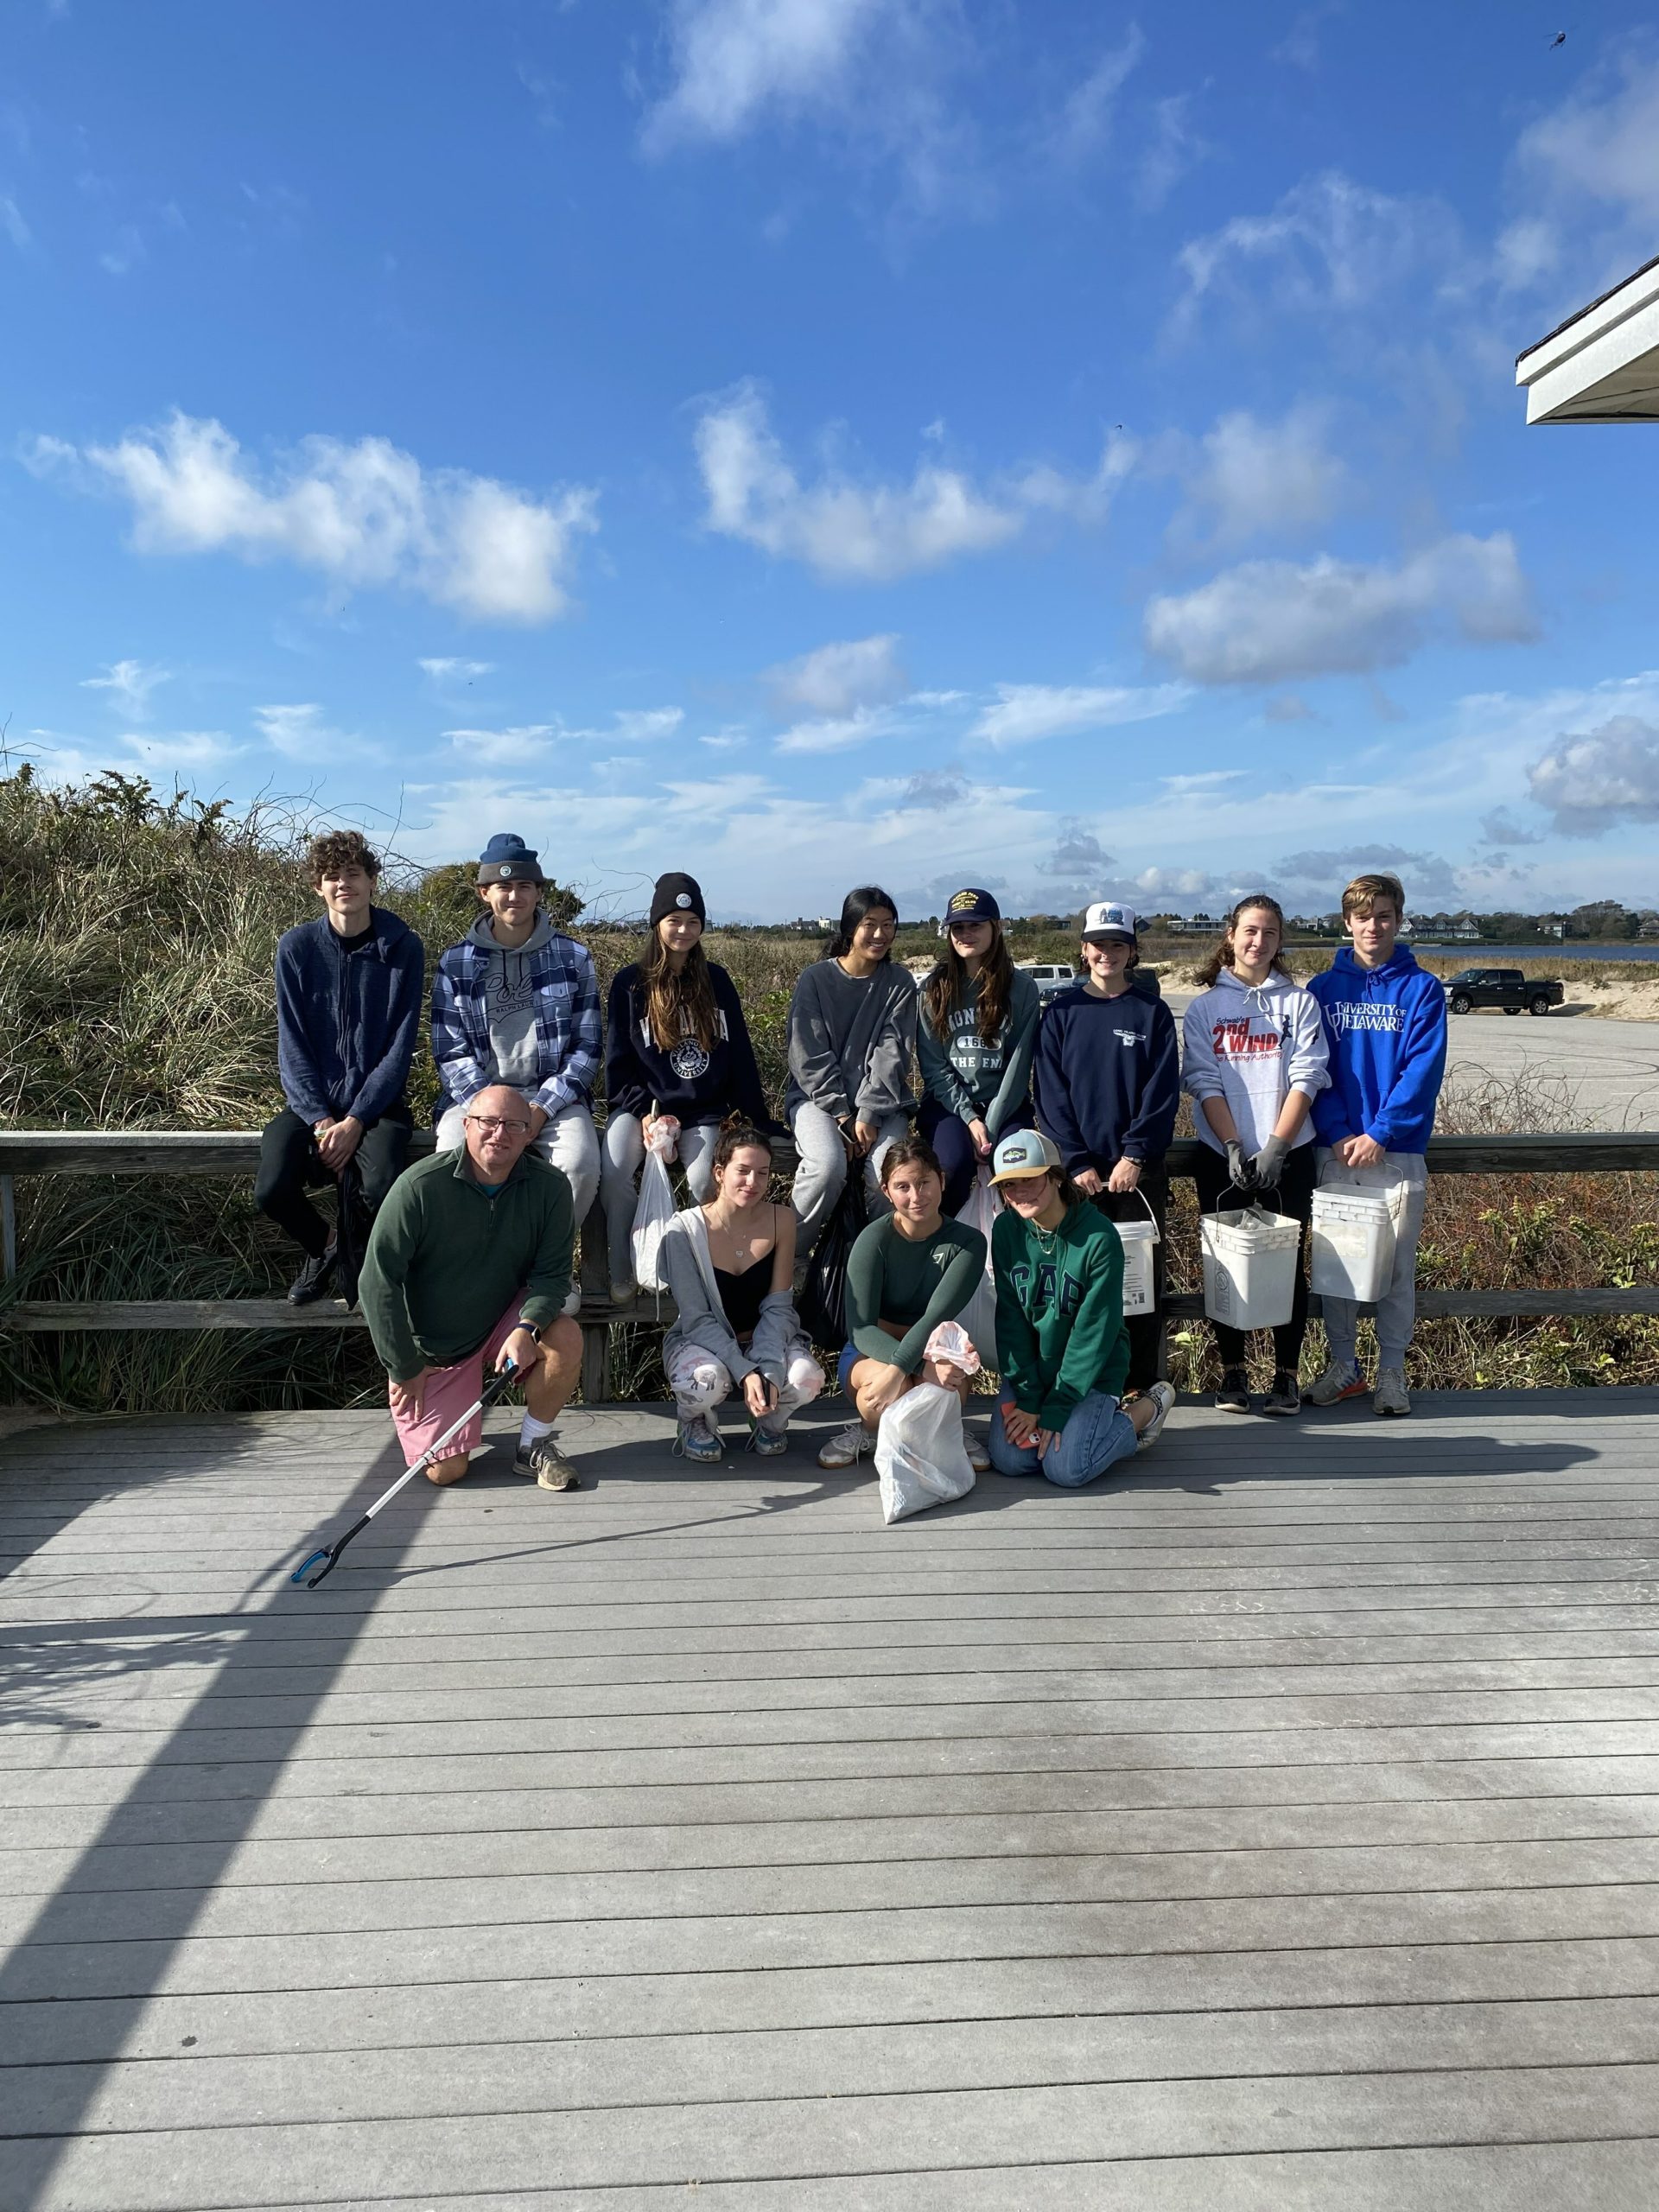 The Pierson High School Environmental Club met the morning of October 30 to clean up Sagg Main Beach. With buckets and bags in tow, the students were eager to work together to make the community environment safe and clean for everyone.